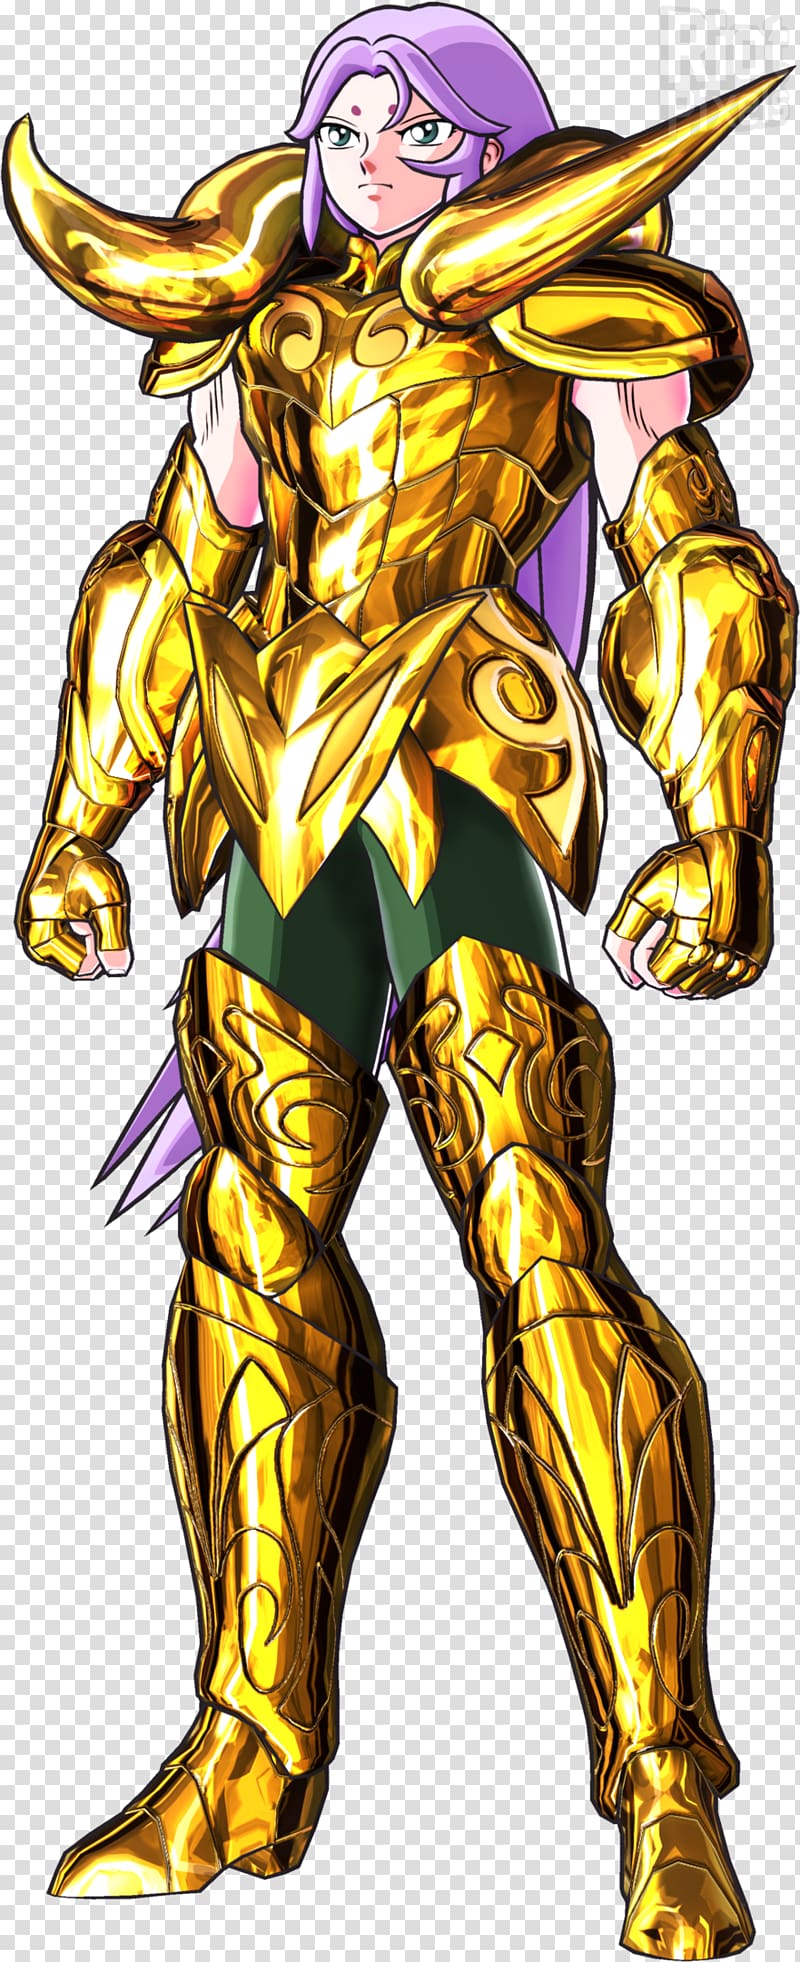 Aries Mu Saint Seiya: Soldiers\' Soul Pegasus Seiya Saint Seiya: Brave Soldiers Saint Seiya: Knights of the Zodiac, aries transparent background PNG clipart